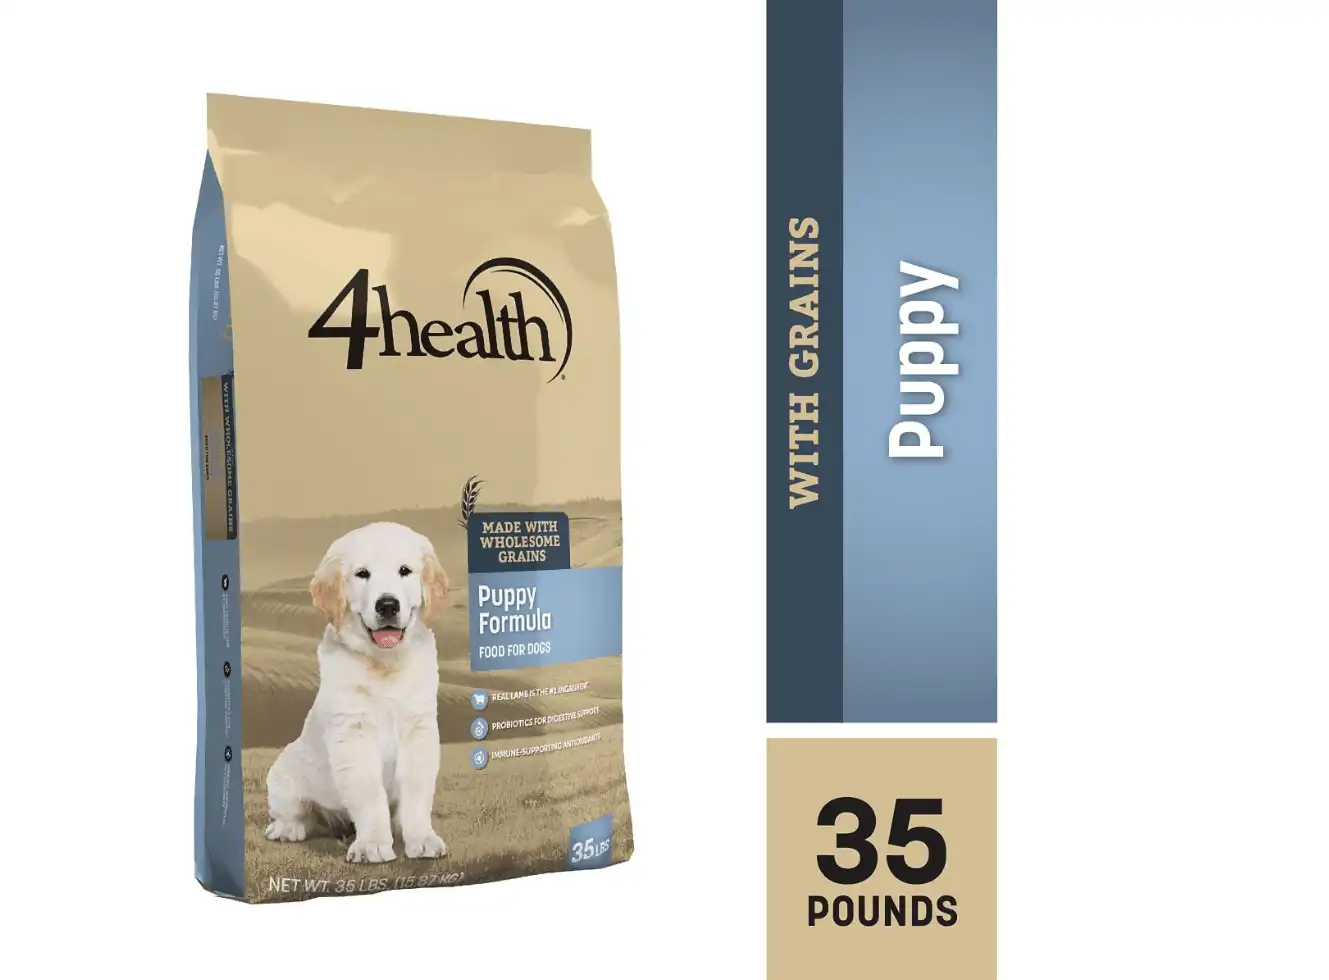 4health Puppy Formula with Wholesome Grains